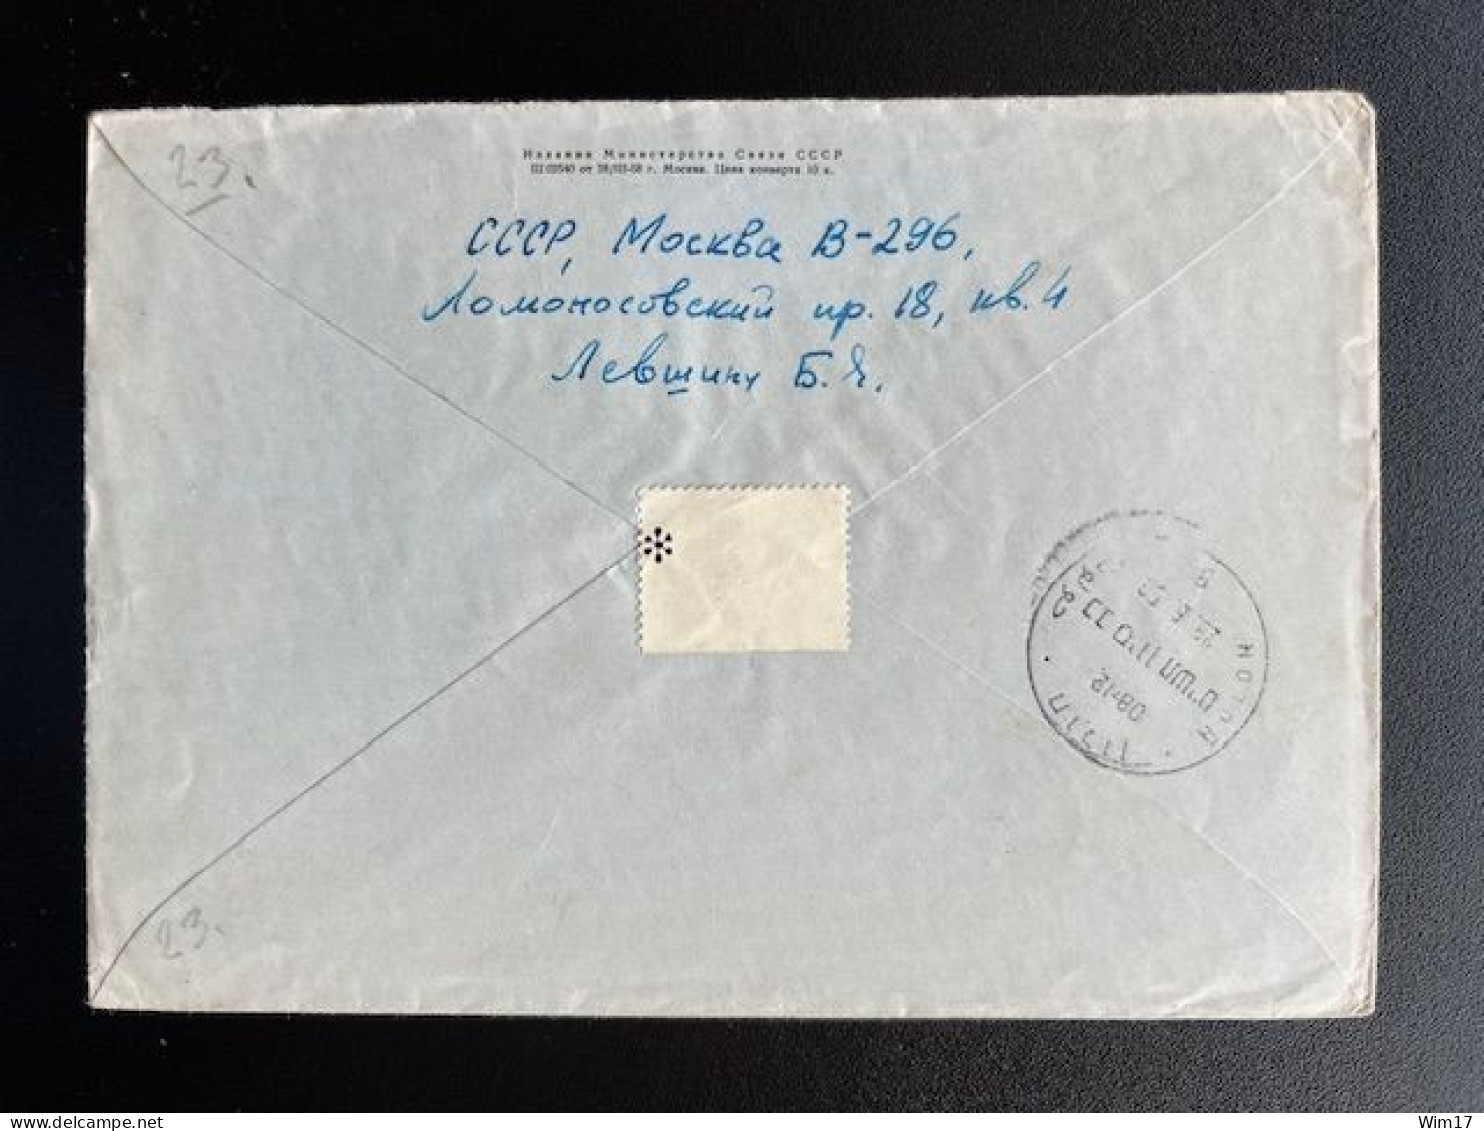 RUSSIA USSR 1958 AIR MAIL LETTER MOSCOW TO AZOR ISRAEL 19-06-1958 SOVJET UNIE CCCP SOVIET UNION - Lettres & Documents